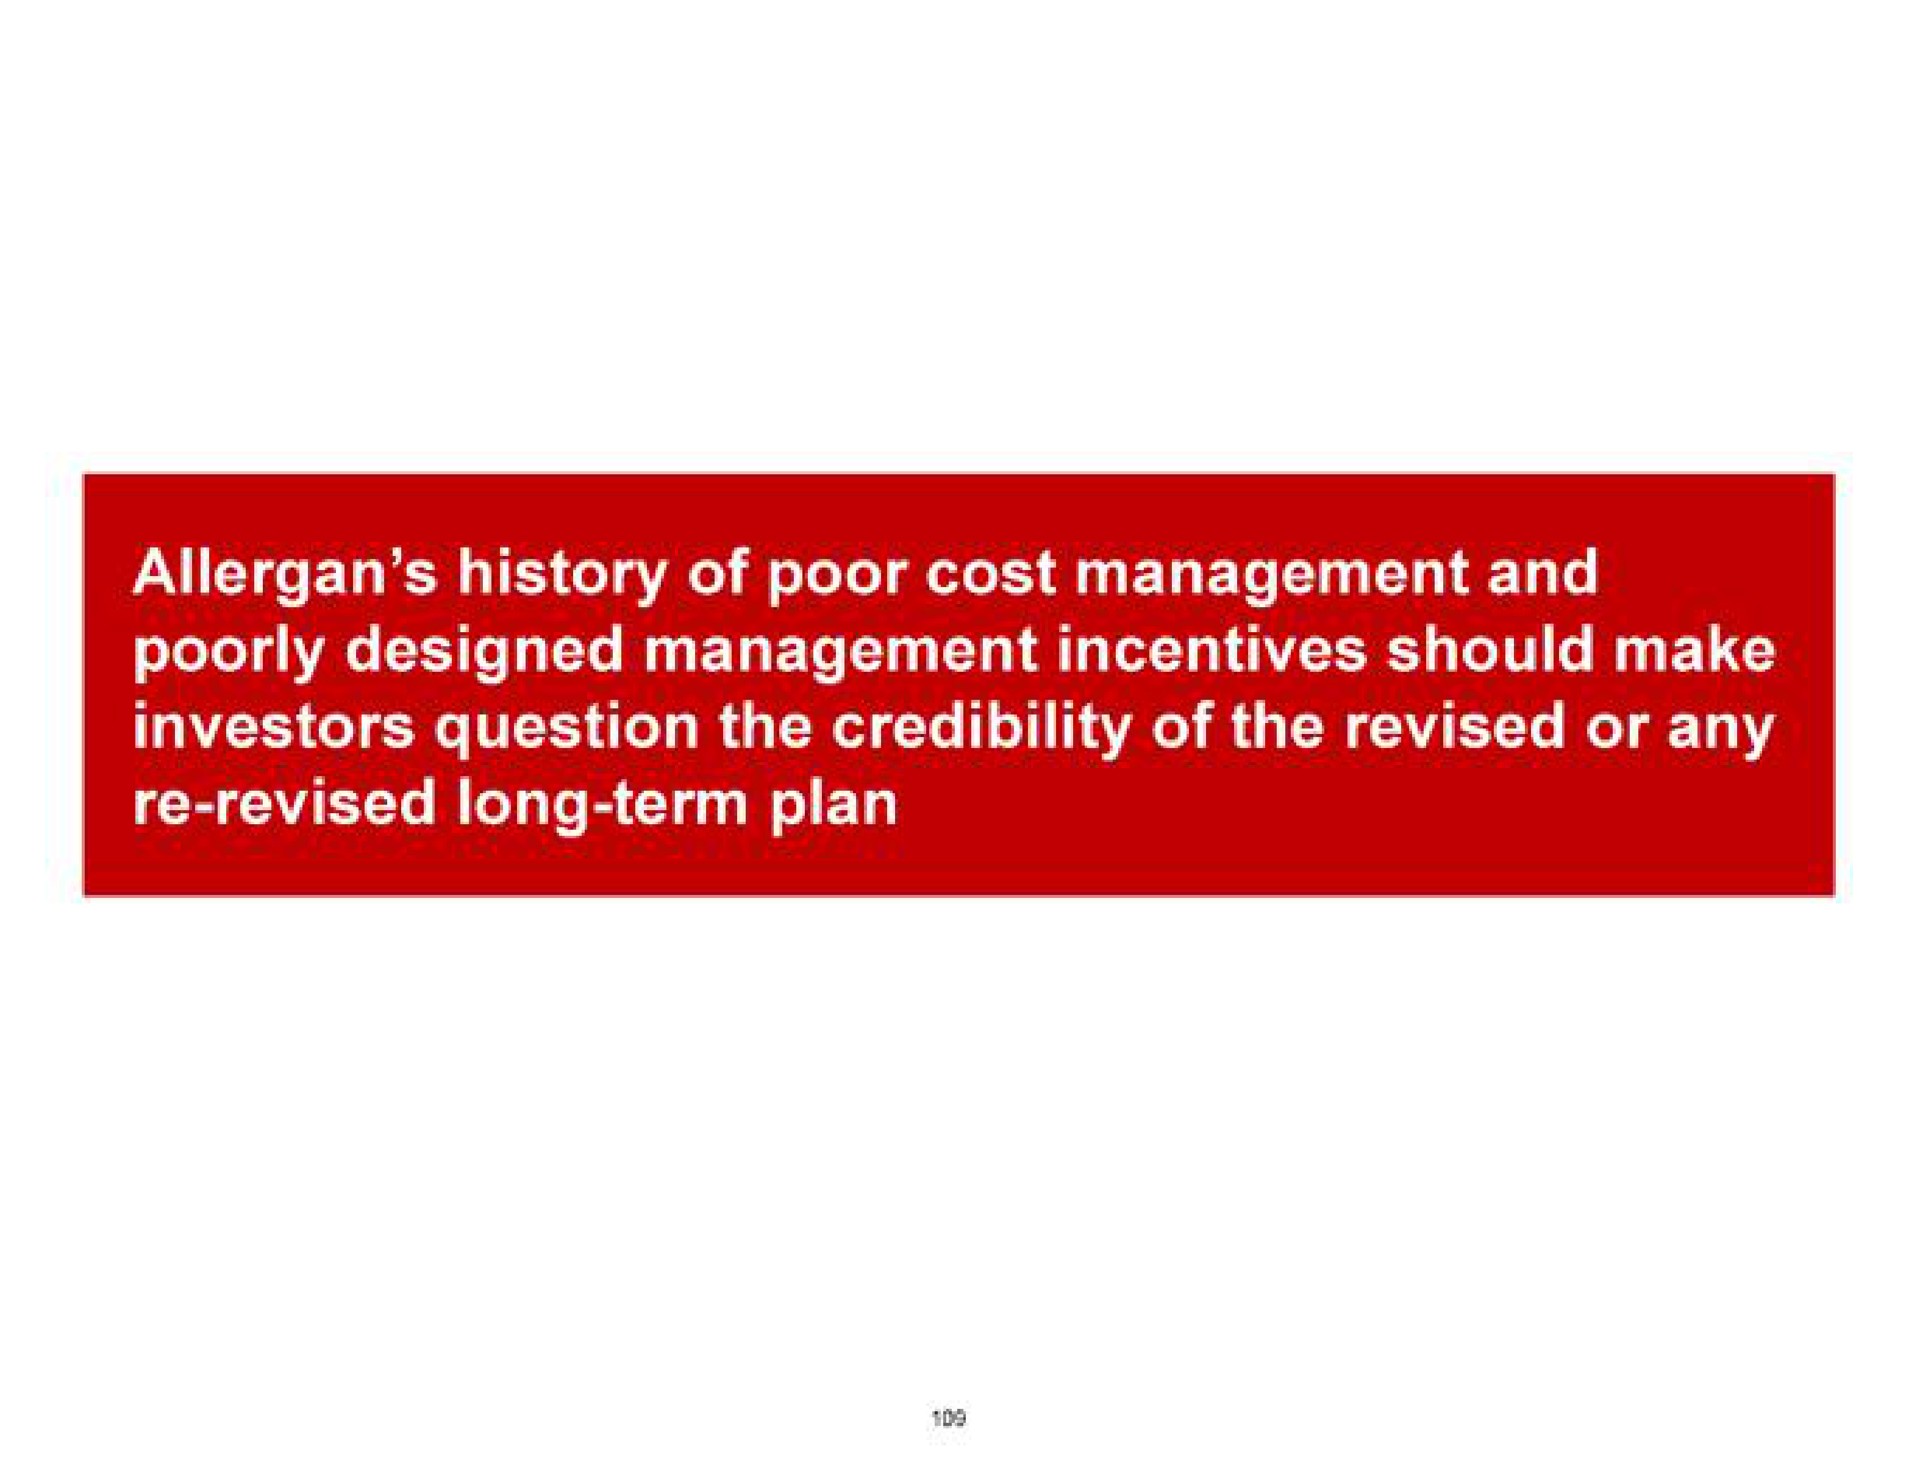 history of poor cost management and poorly designed management incentives should make investors question the credibility of the revised or any revised long term plan | Pershing Square